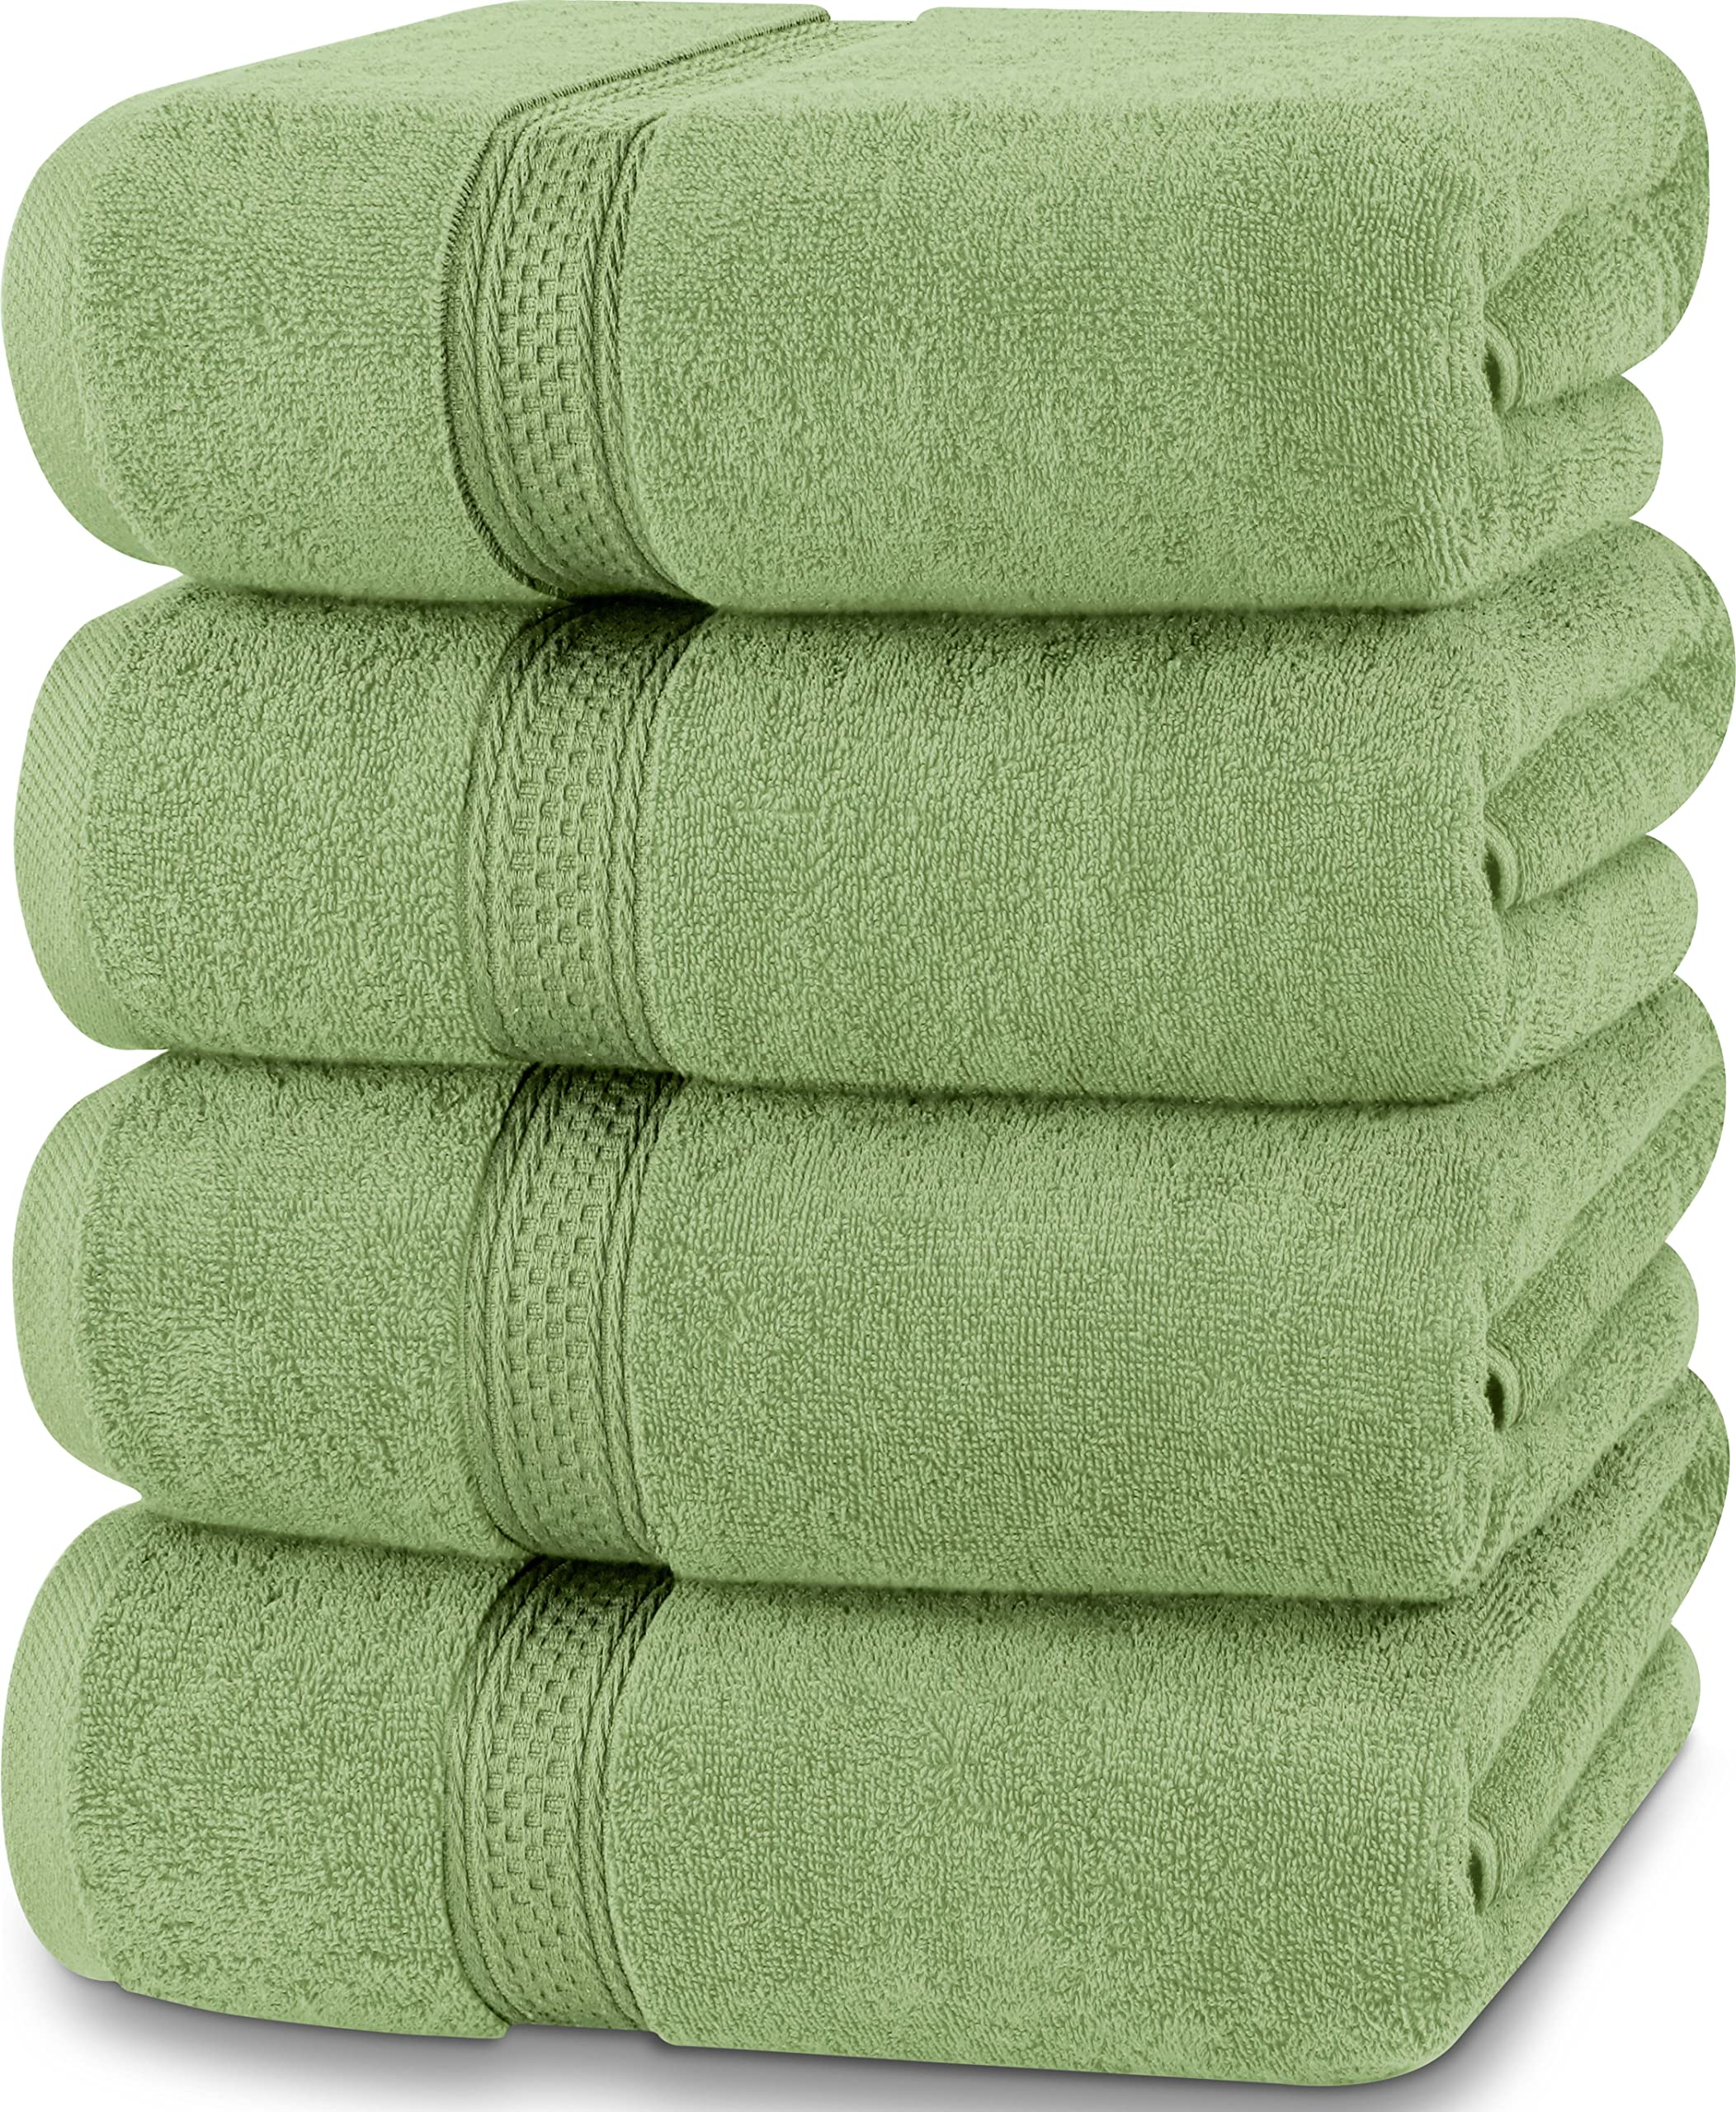 Book Cover Utopia Towels 4 Pack Premium Bath Towels Set, (27 x 54 Inches) 100% Ring Spun Cotton 600GSM, Lightweight and Highly Absorbent Quick Drying Towels, Perfect for Daily Use (Sage Green) 4 Piece Bath Towel Set Sage Green